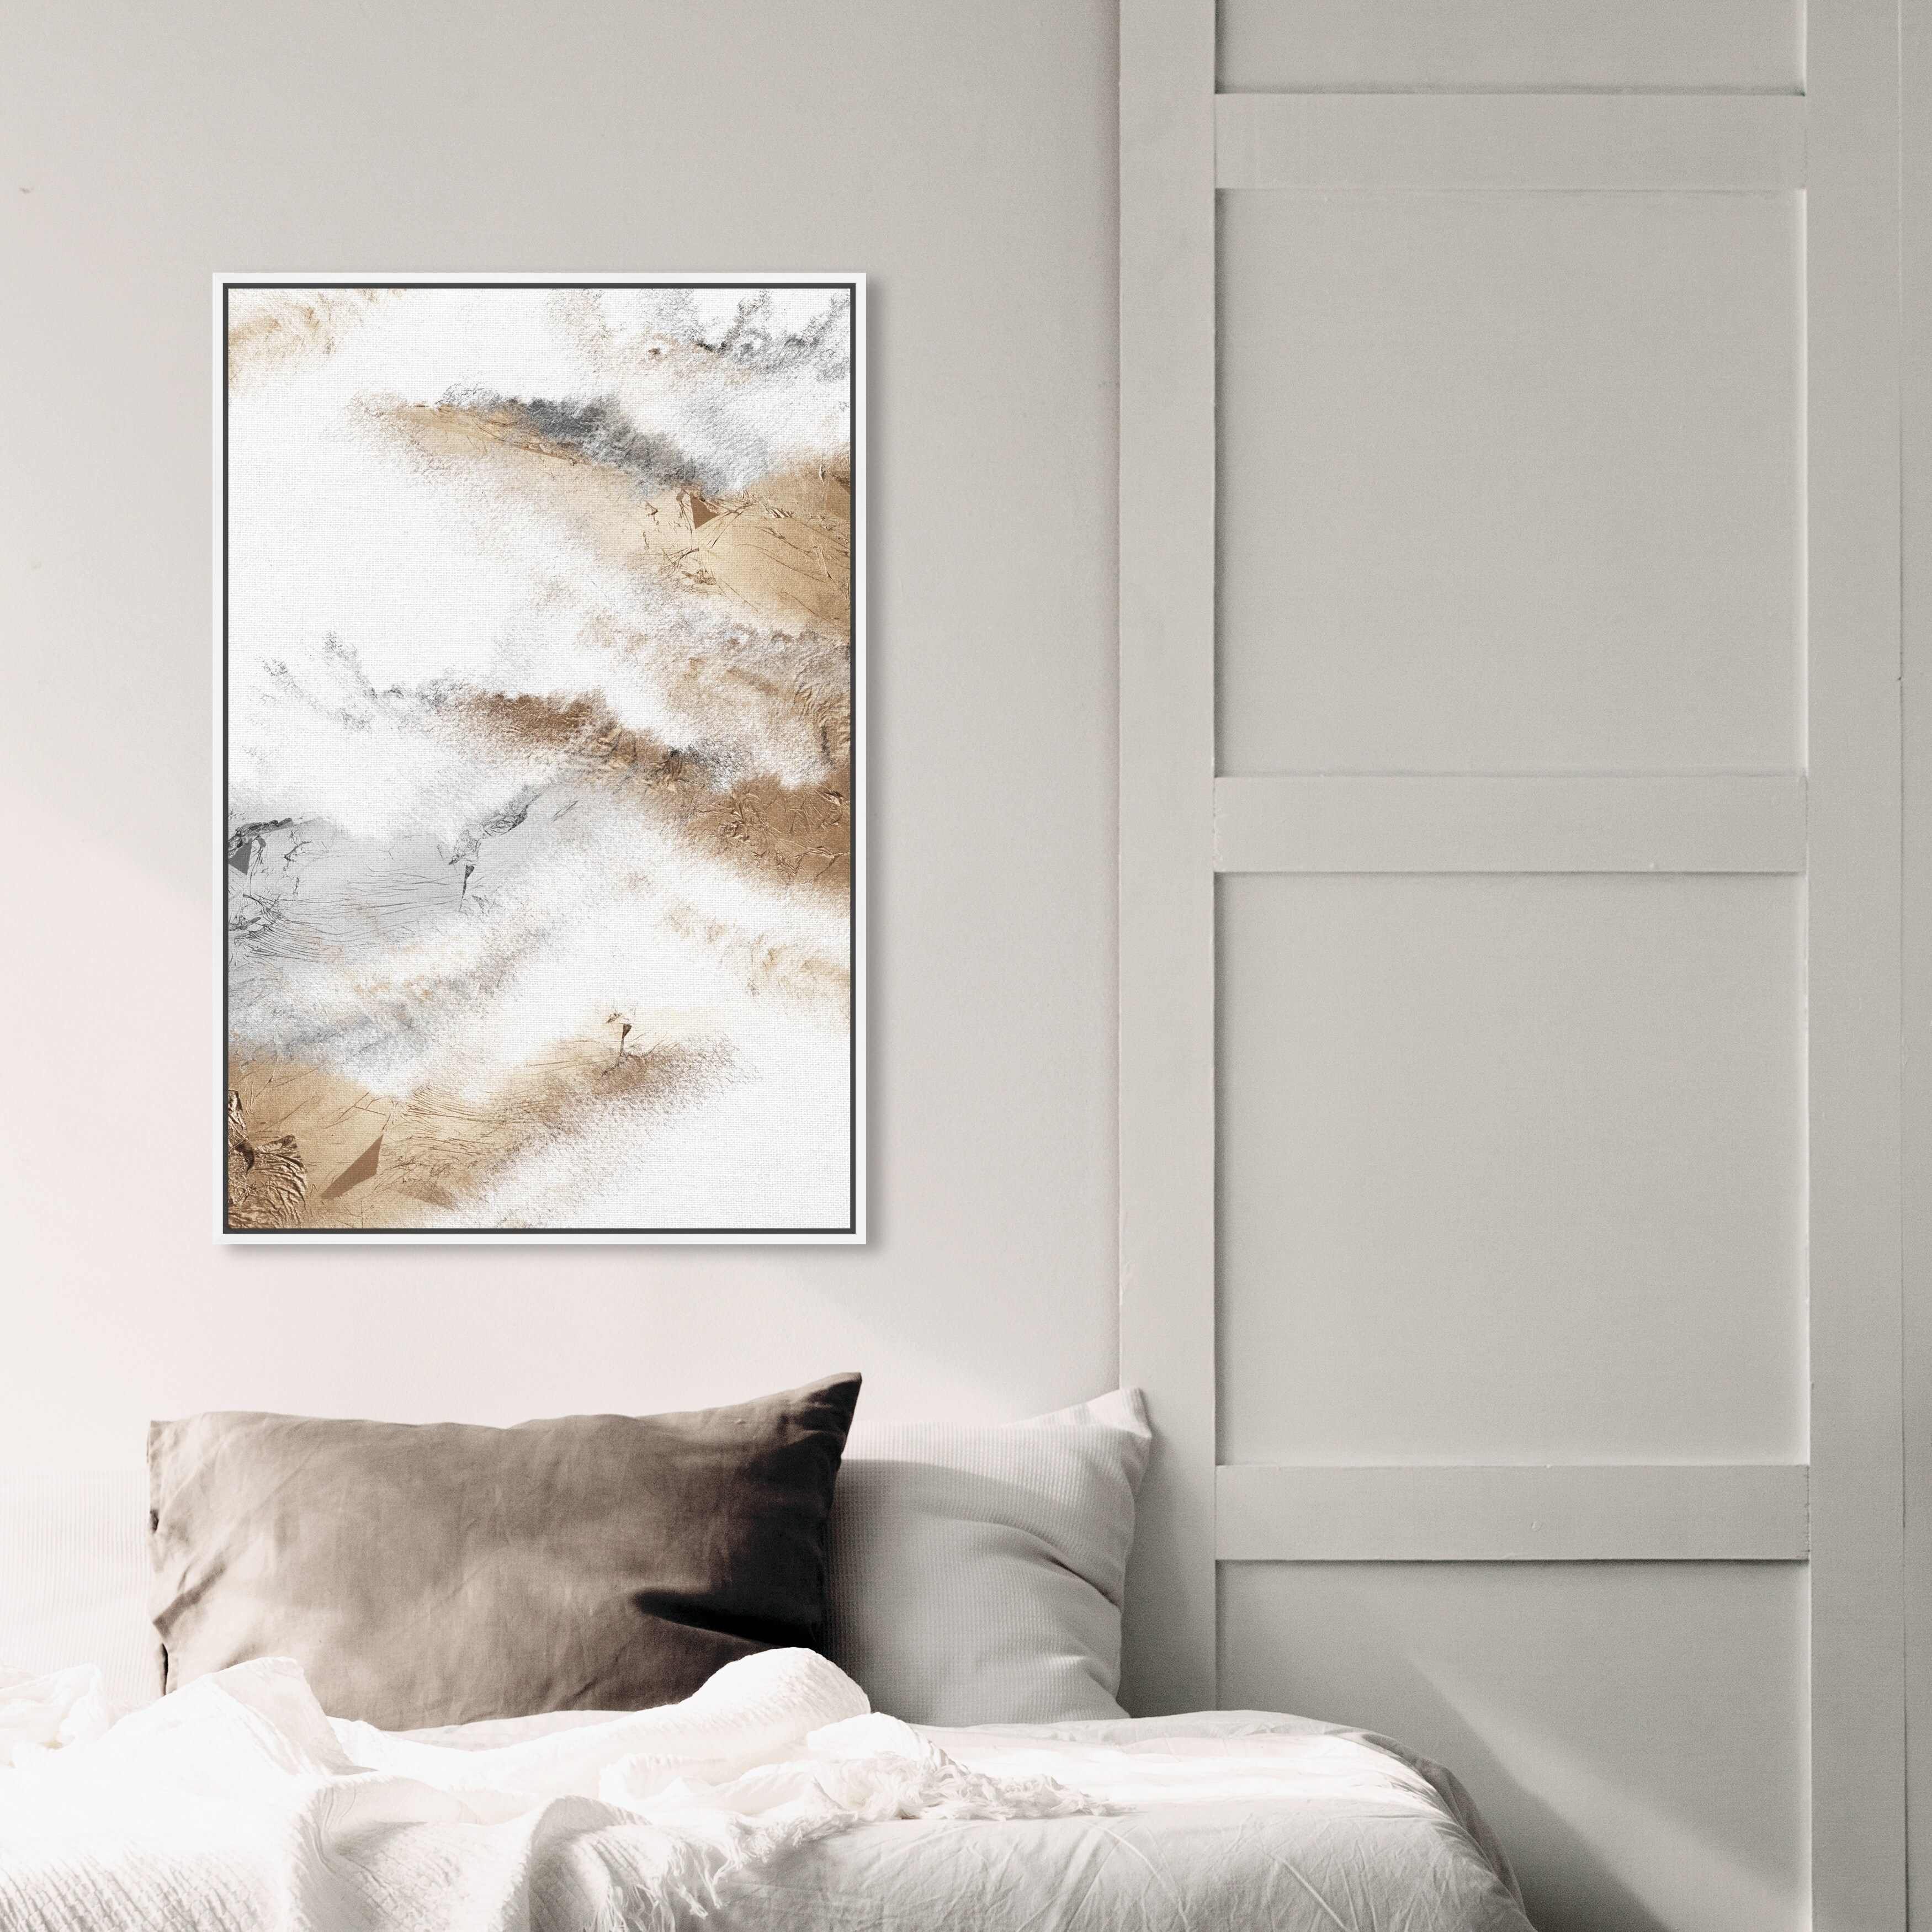 Oliver Gal 'Brianna Majestic' Abstract Wall Art Framed Canvas Print Brush Strokes- White, Gray